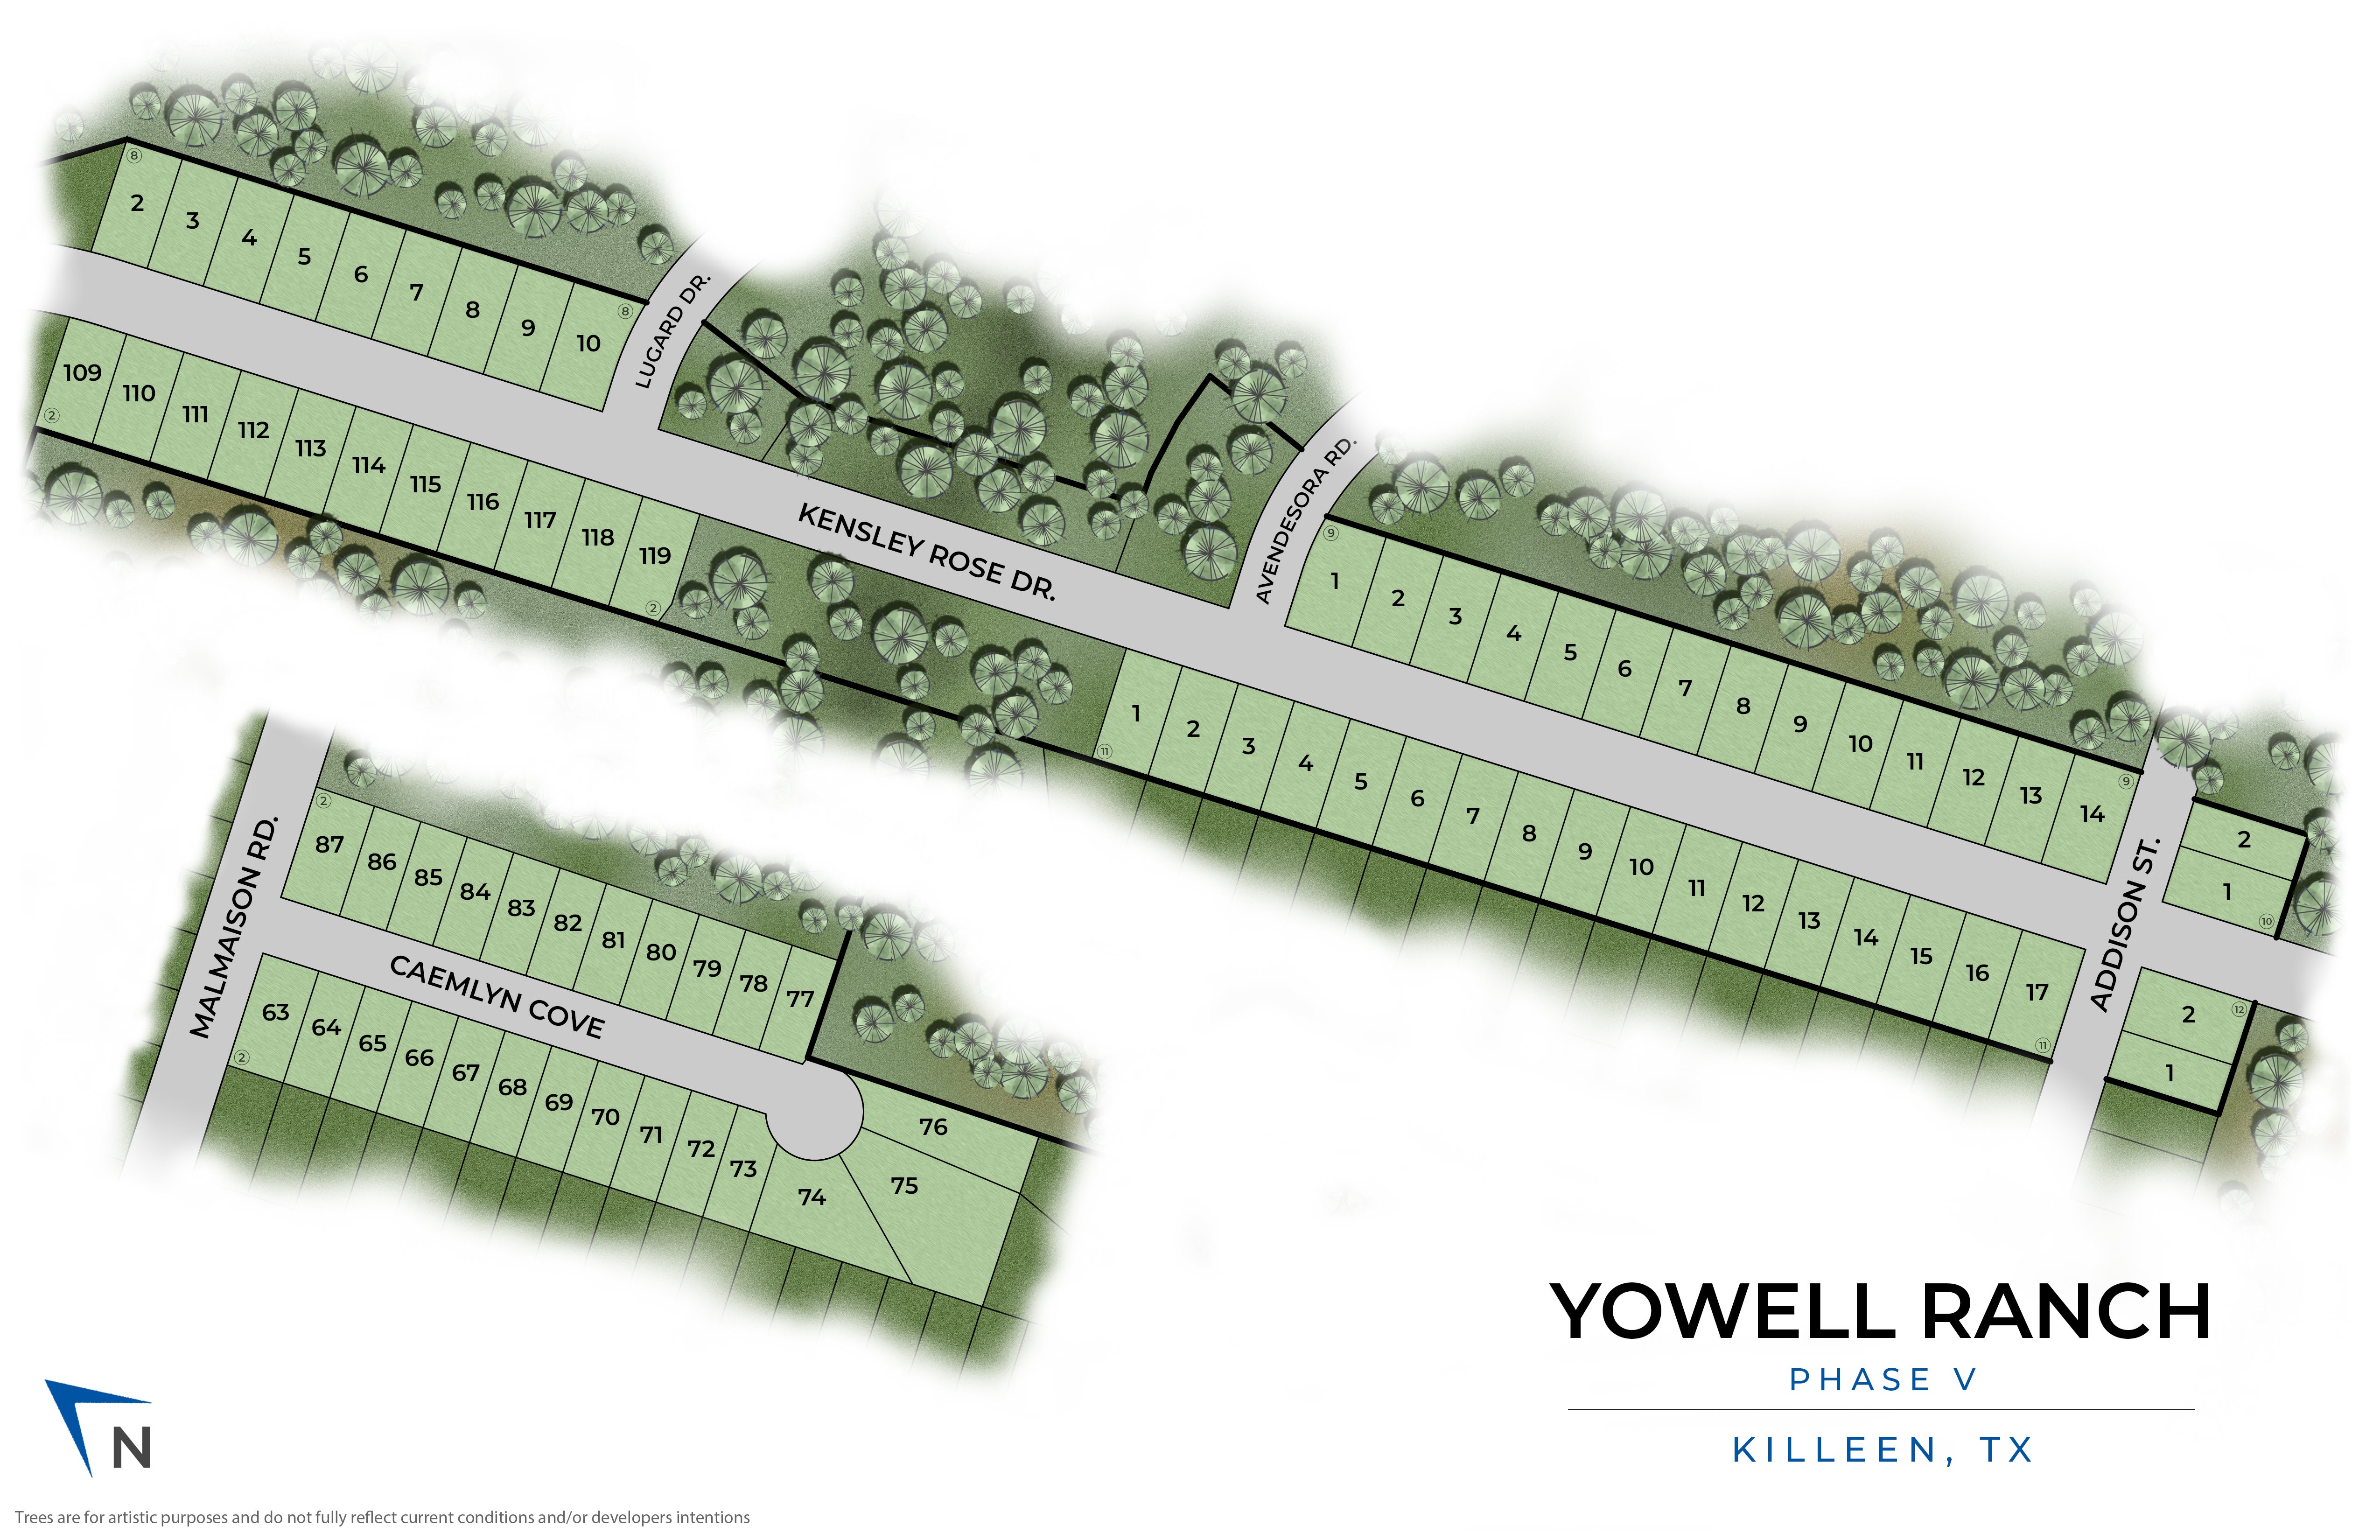 Killeen, TX Yowell Ranch New Homes from Stylecraft Builders